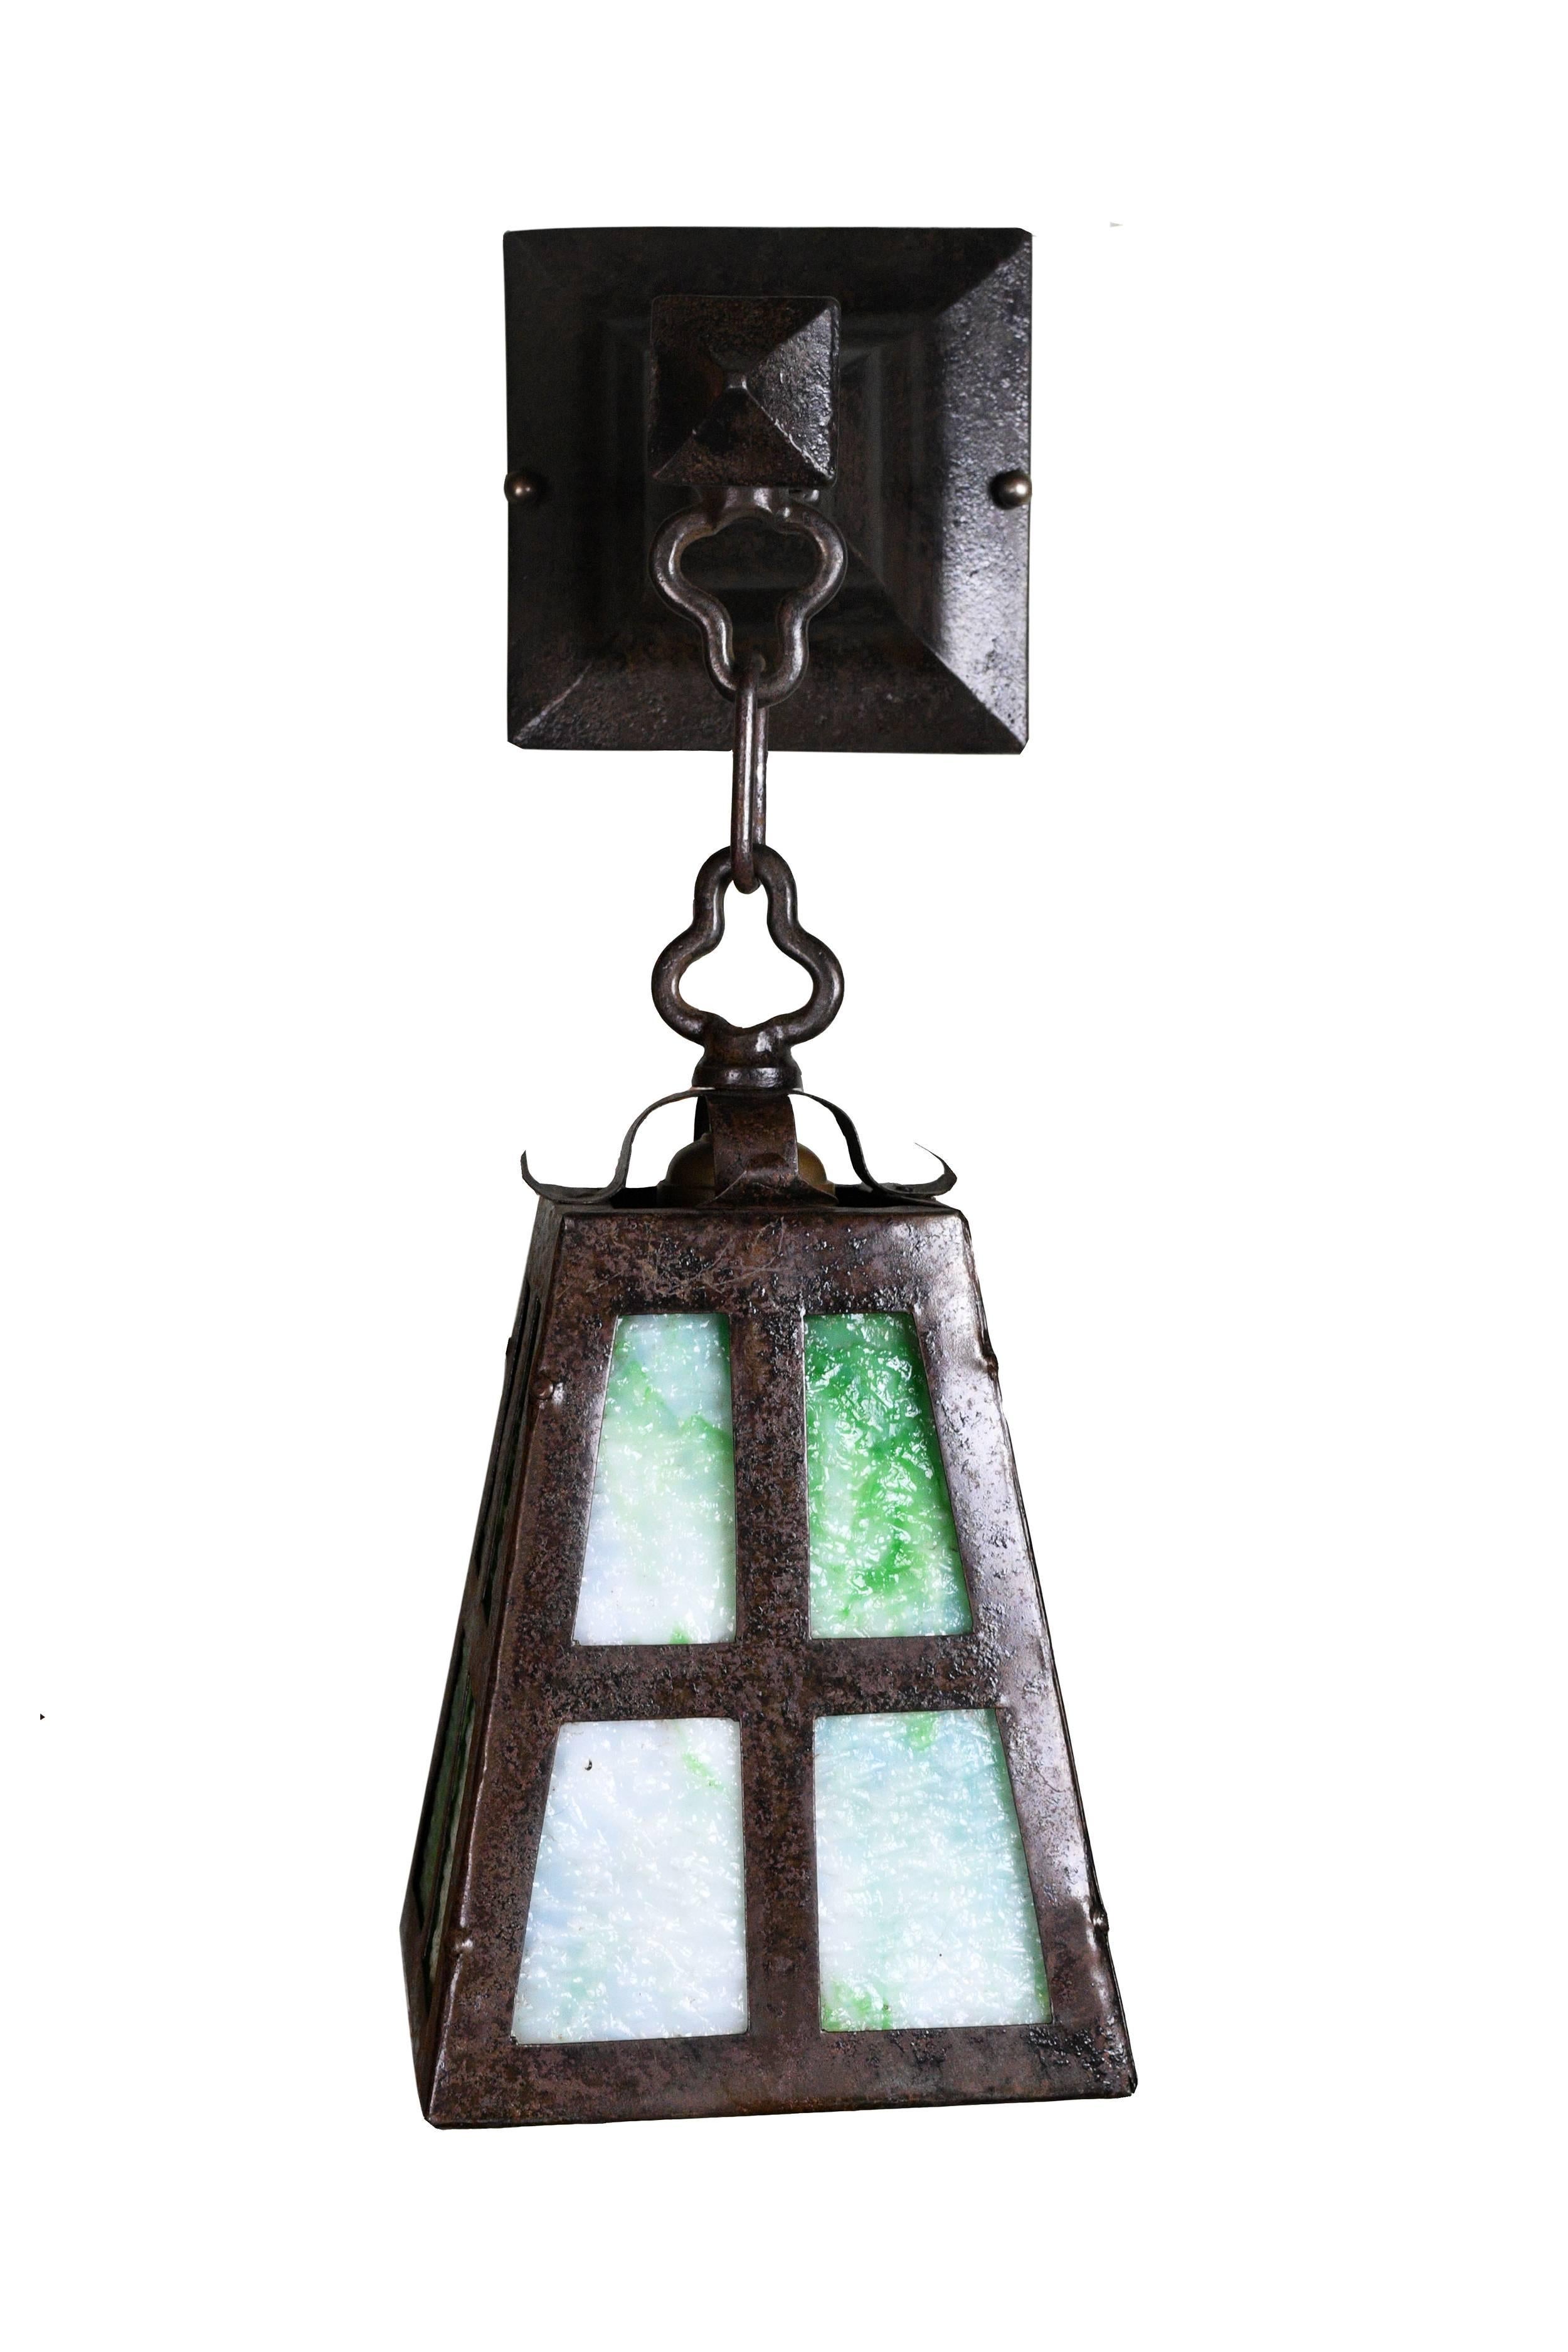 Beautiful Arts & Crafts style iron sconce. The dark, sturdy iron body makes a contrast with the bright green slag glass, and the combination is definitely eye-catching, 

circa 1920.
Finish: Painted
One medium socket.

We find that early antique